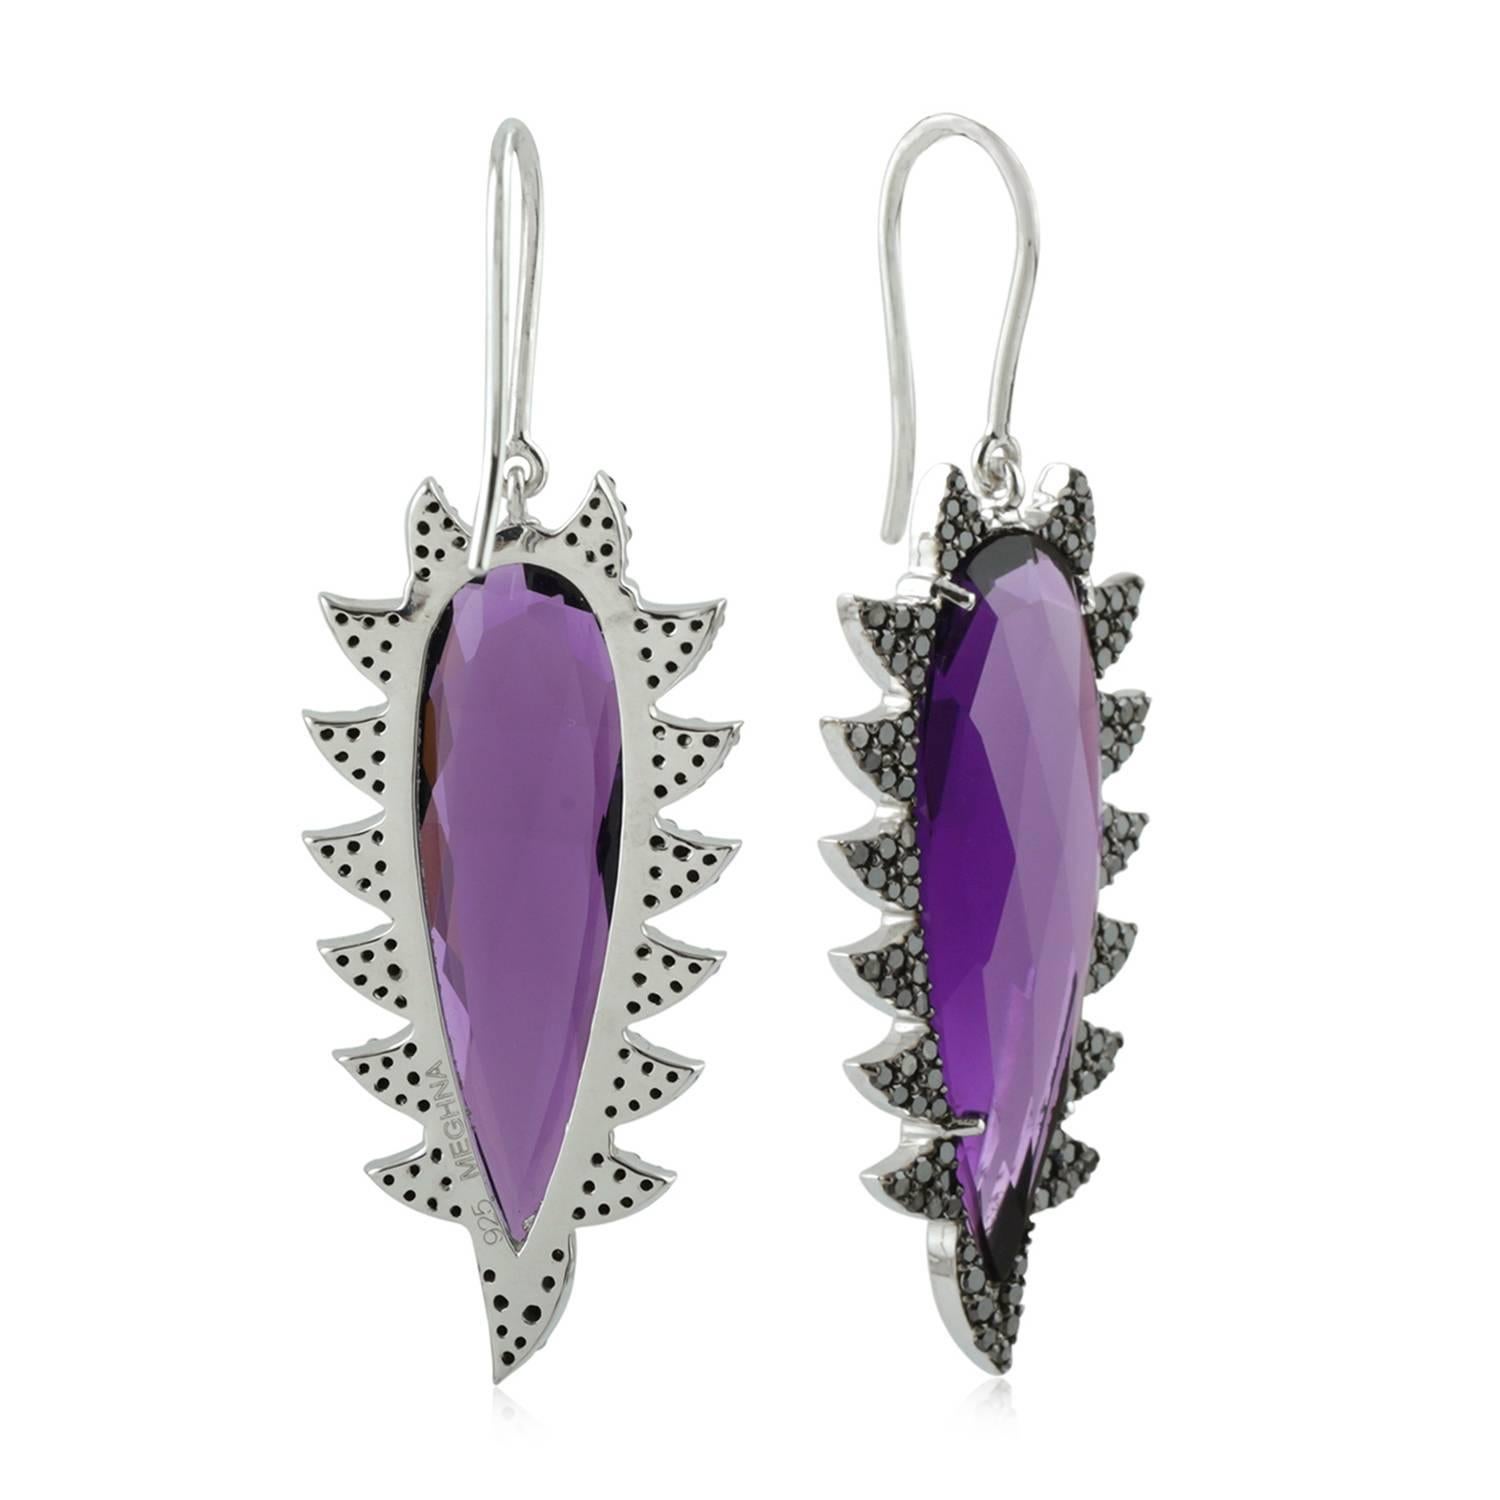 These modern, edgy and fiercely gorgeous drop earrings are handcrafted in 14K gold, sterling silver, 19.14 carat amethyst and 1.24 carat of black diamonds. Exquisitely framed in signature 